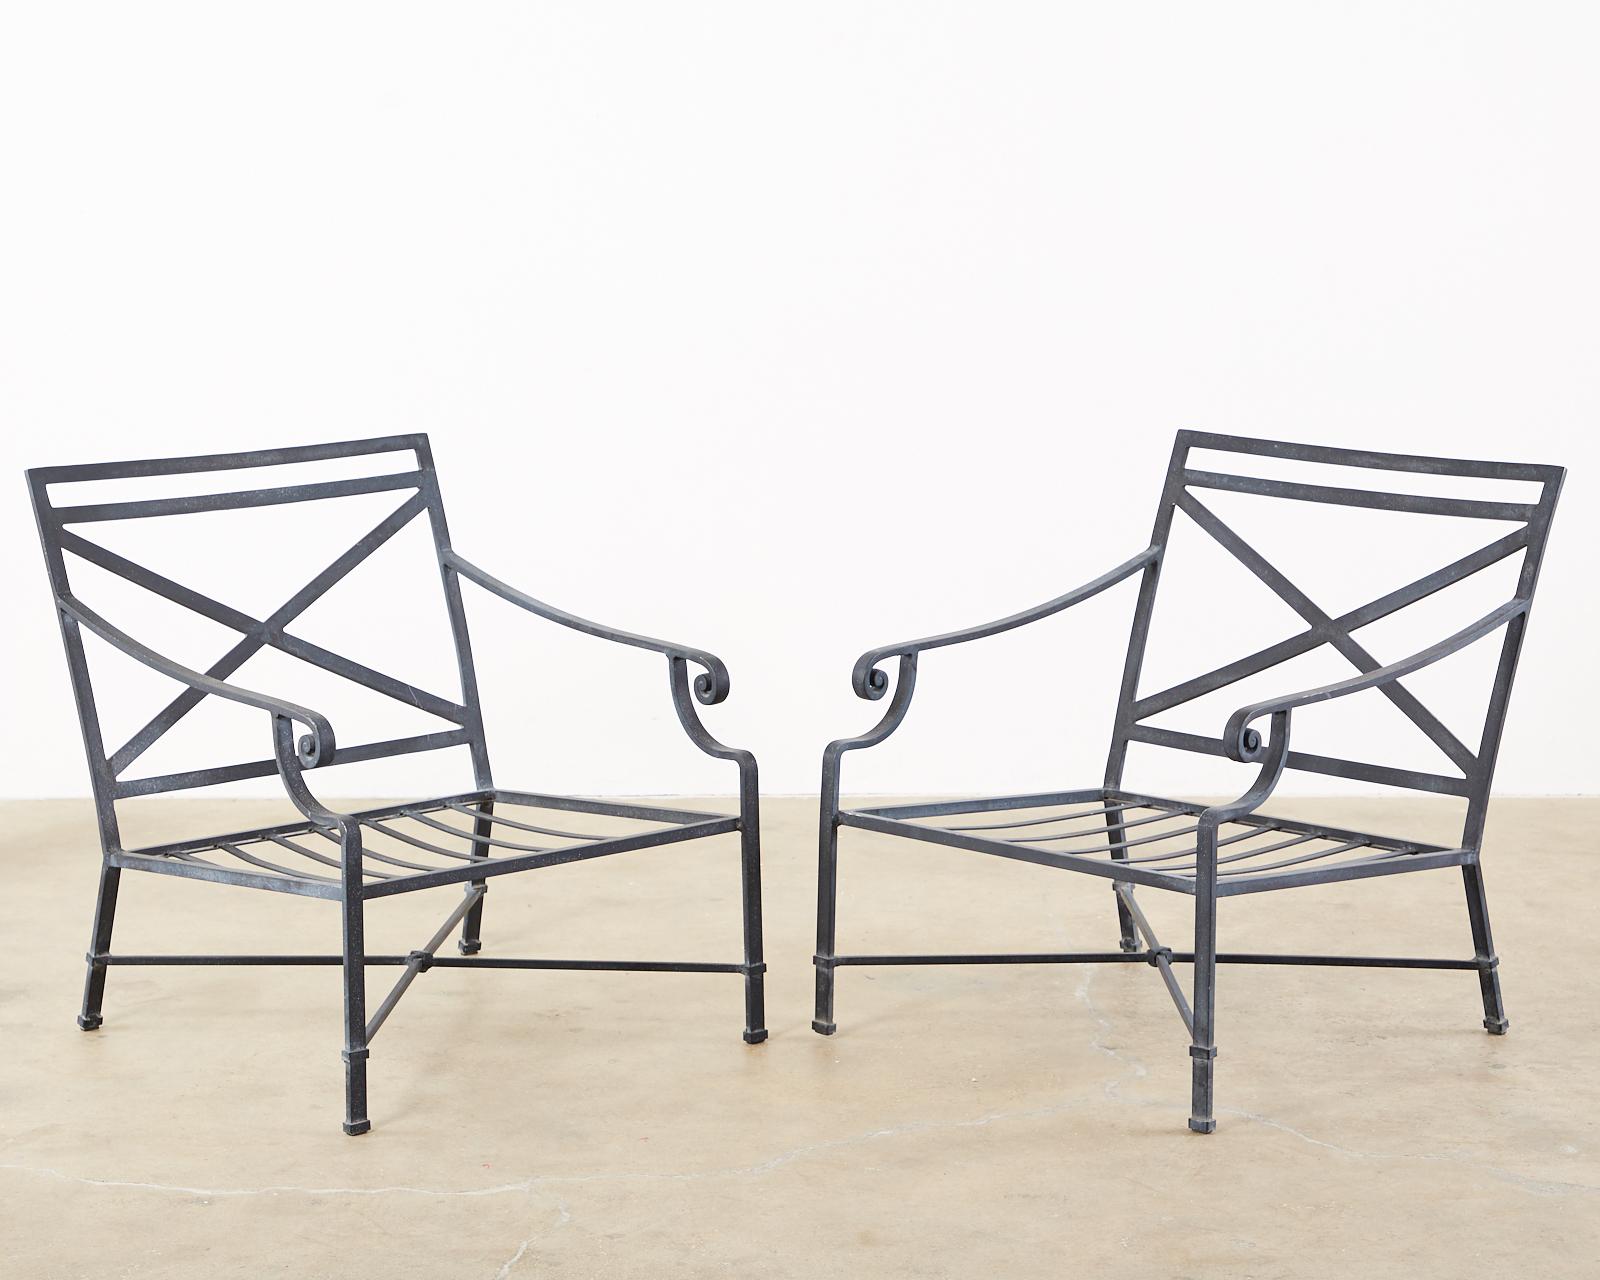 Set of four aluminum patio and garden lounge chairs made by Brown Jordan. All armchairs made of wrought aluminum with a multi-step powder coated finish. The black patina has very faint silver and gold flecks on the finish. Known as Brown Jordan's